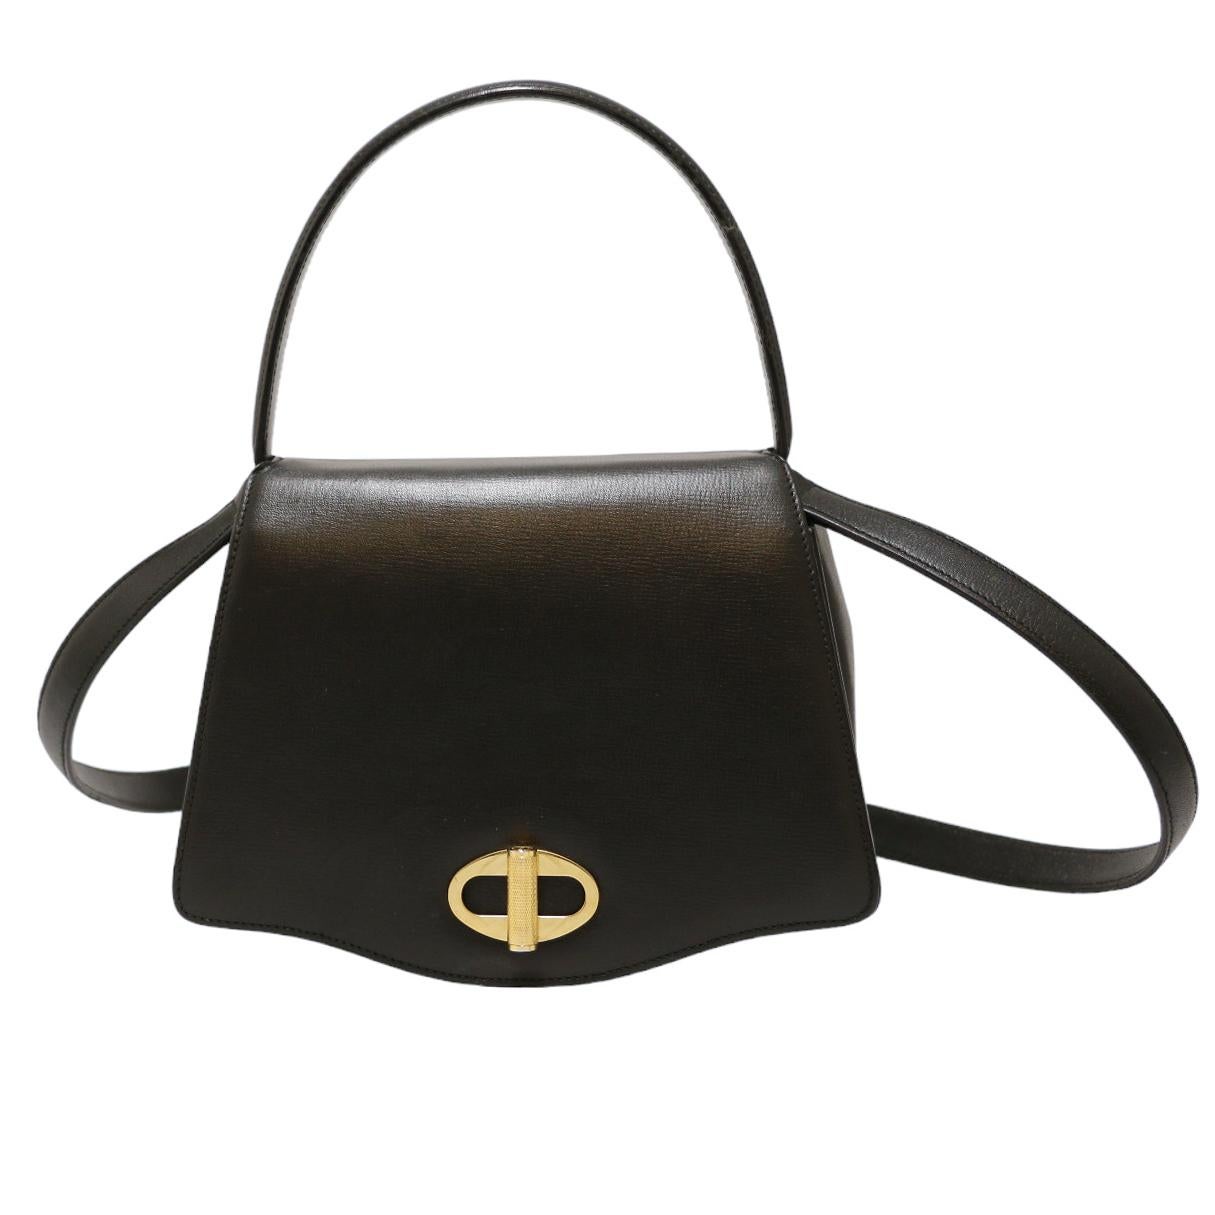 Beautiful vintage bag by Cartier in black leather and golden hardware
Condition : excellent
Made in France
Genre : women
Material : black grained leather
Interior : black suede
Color : black
Dimensions : 24 x 17 x 10 cm
Strap (removable) : 102